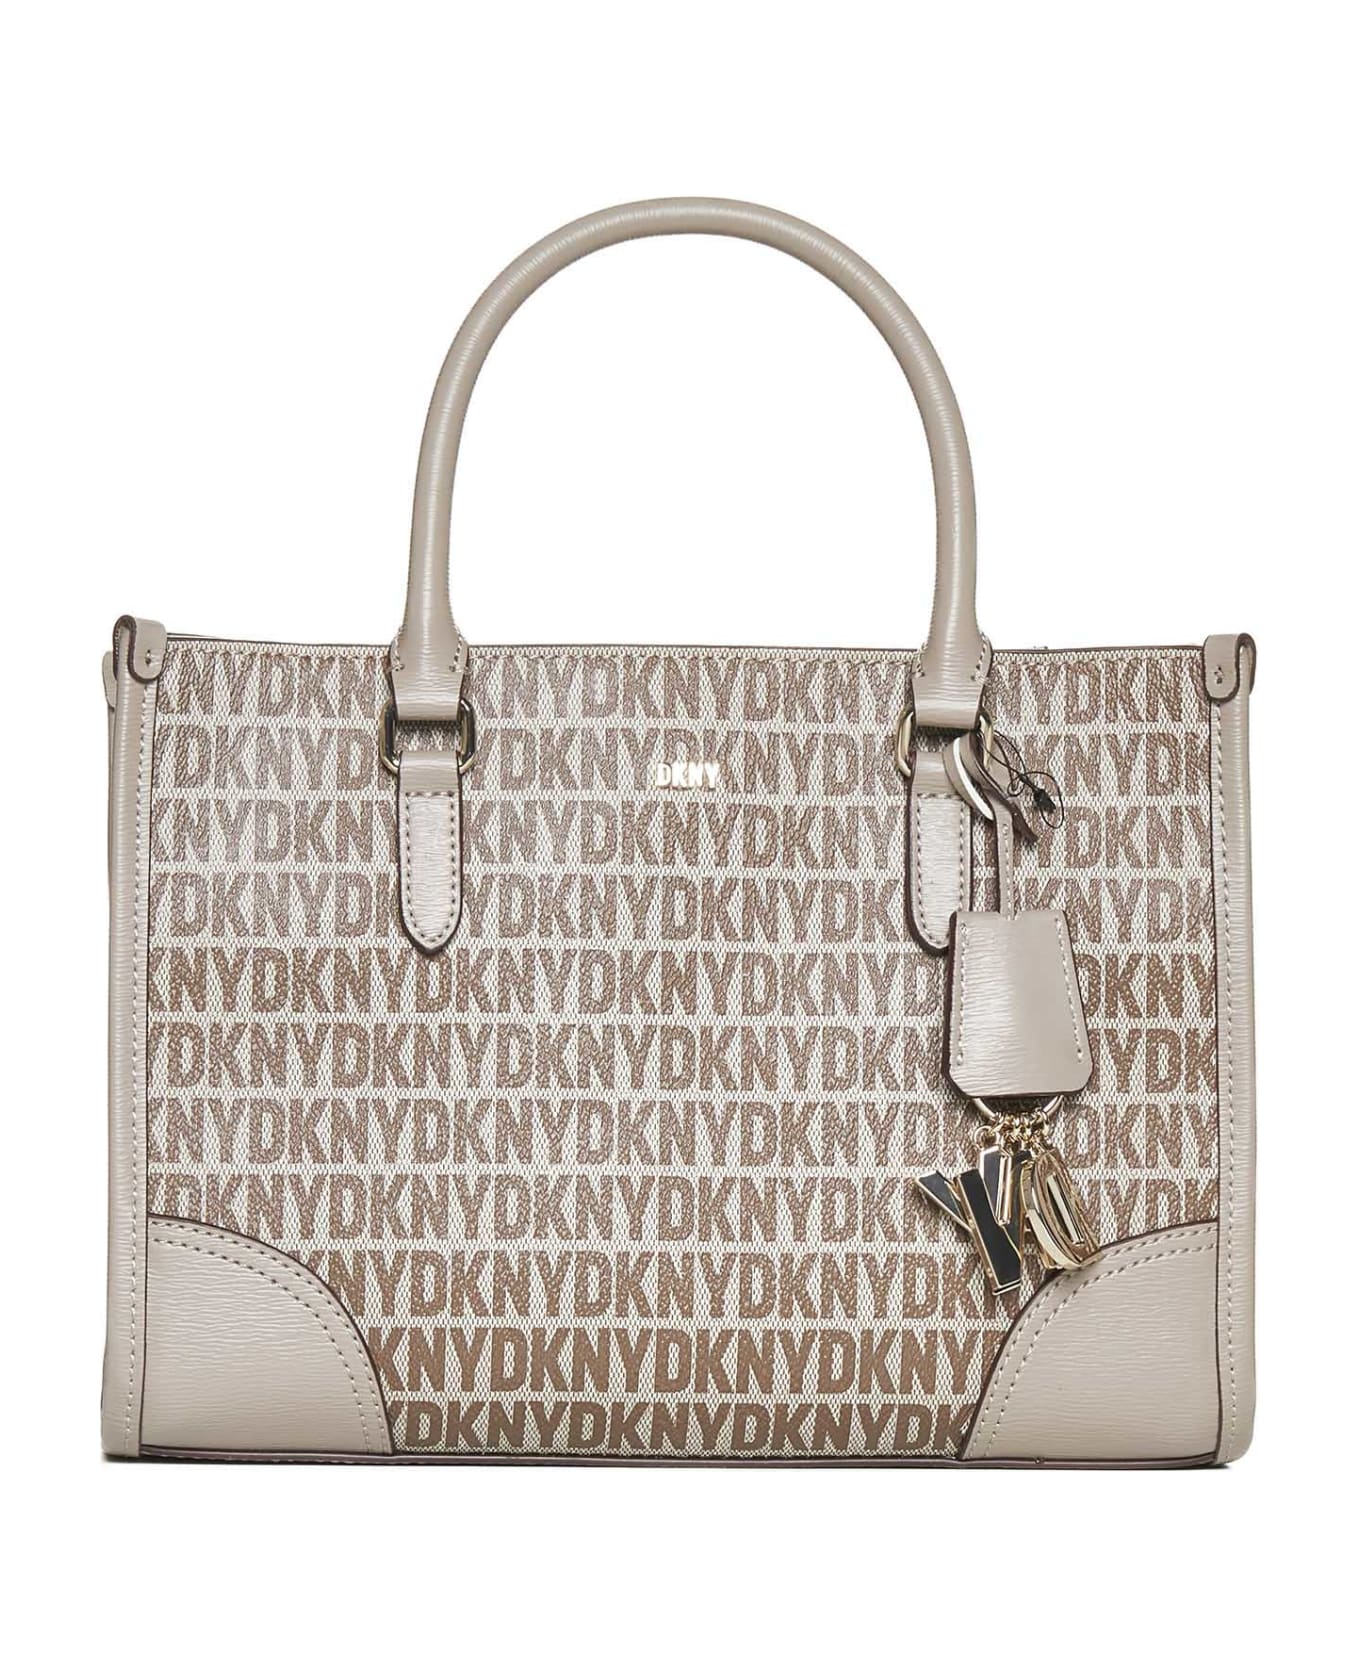 DKNY Tote - Chino/toffee トートバッグ